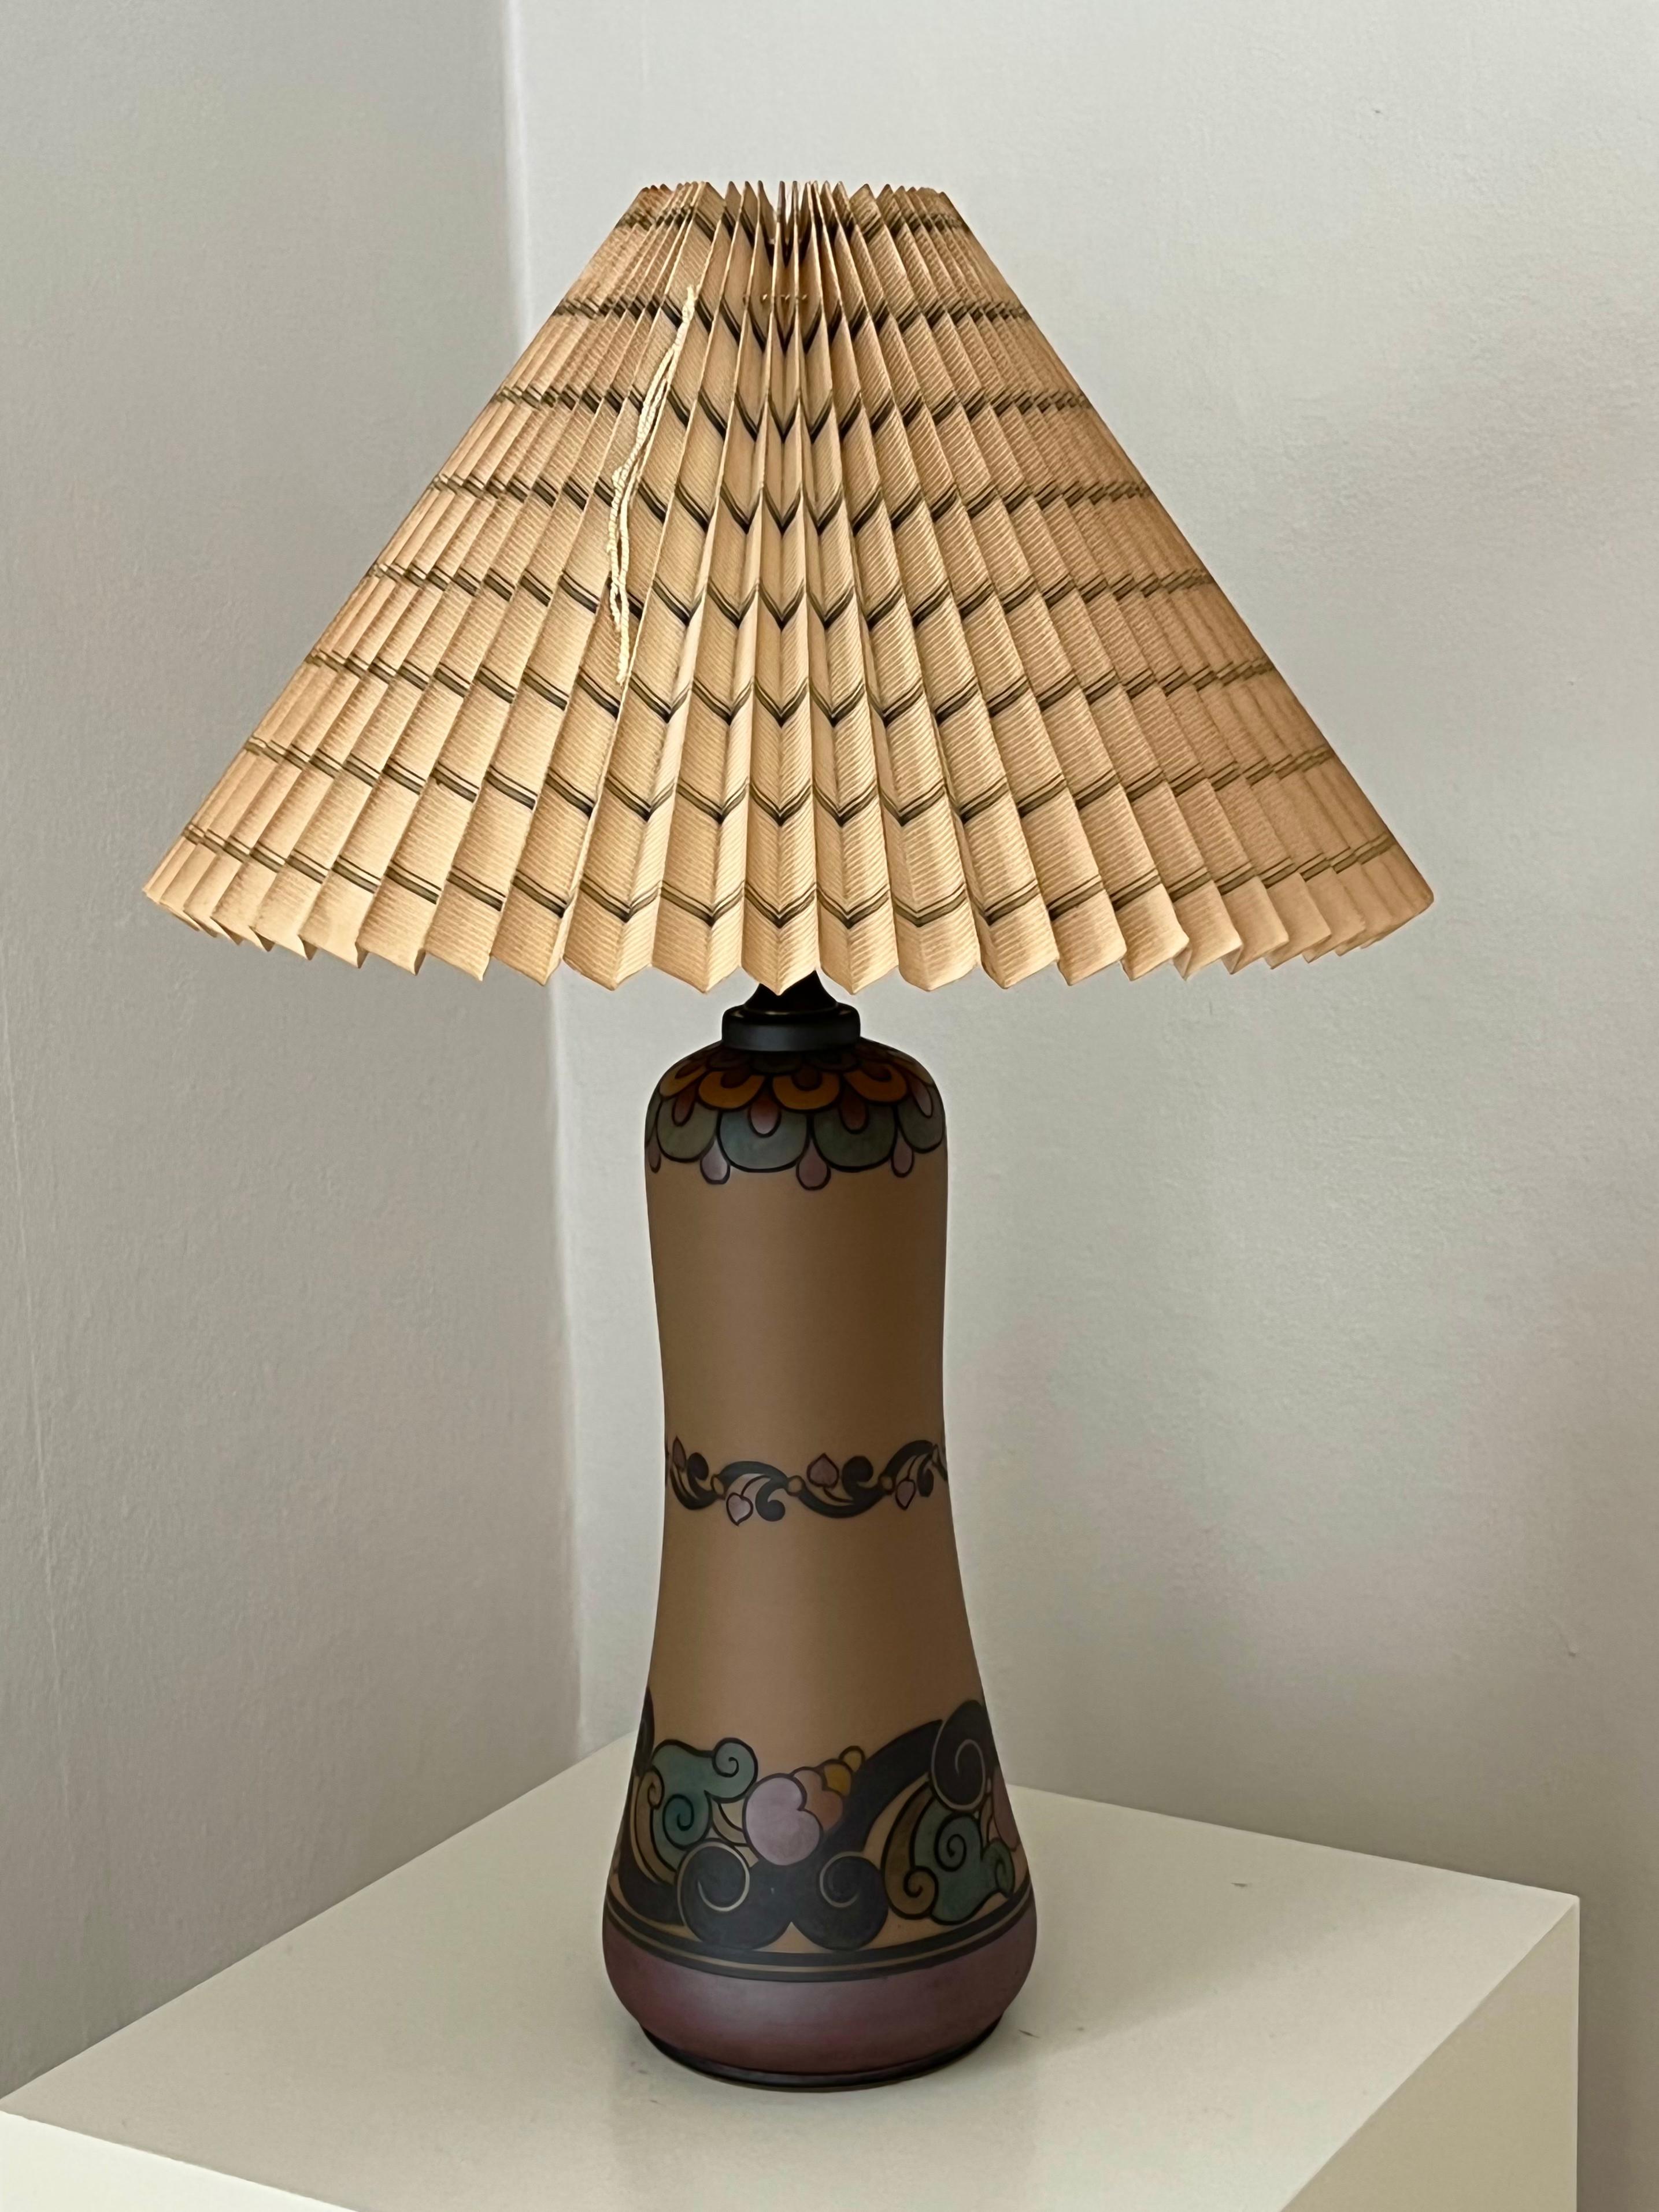 This tall Art nouveau Danish ceramic table lamp is hand decorated, made by L. Hjort ceramic factory on Danish island Bornholm that is famous for it's outstanding ceramic workshops. Hand decorated with typical art nouveau / arts & crafts organic